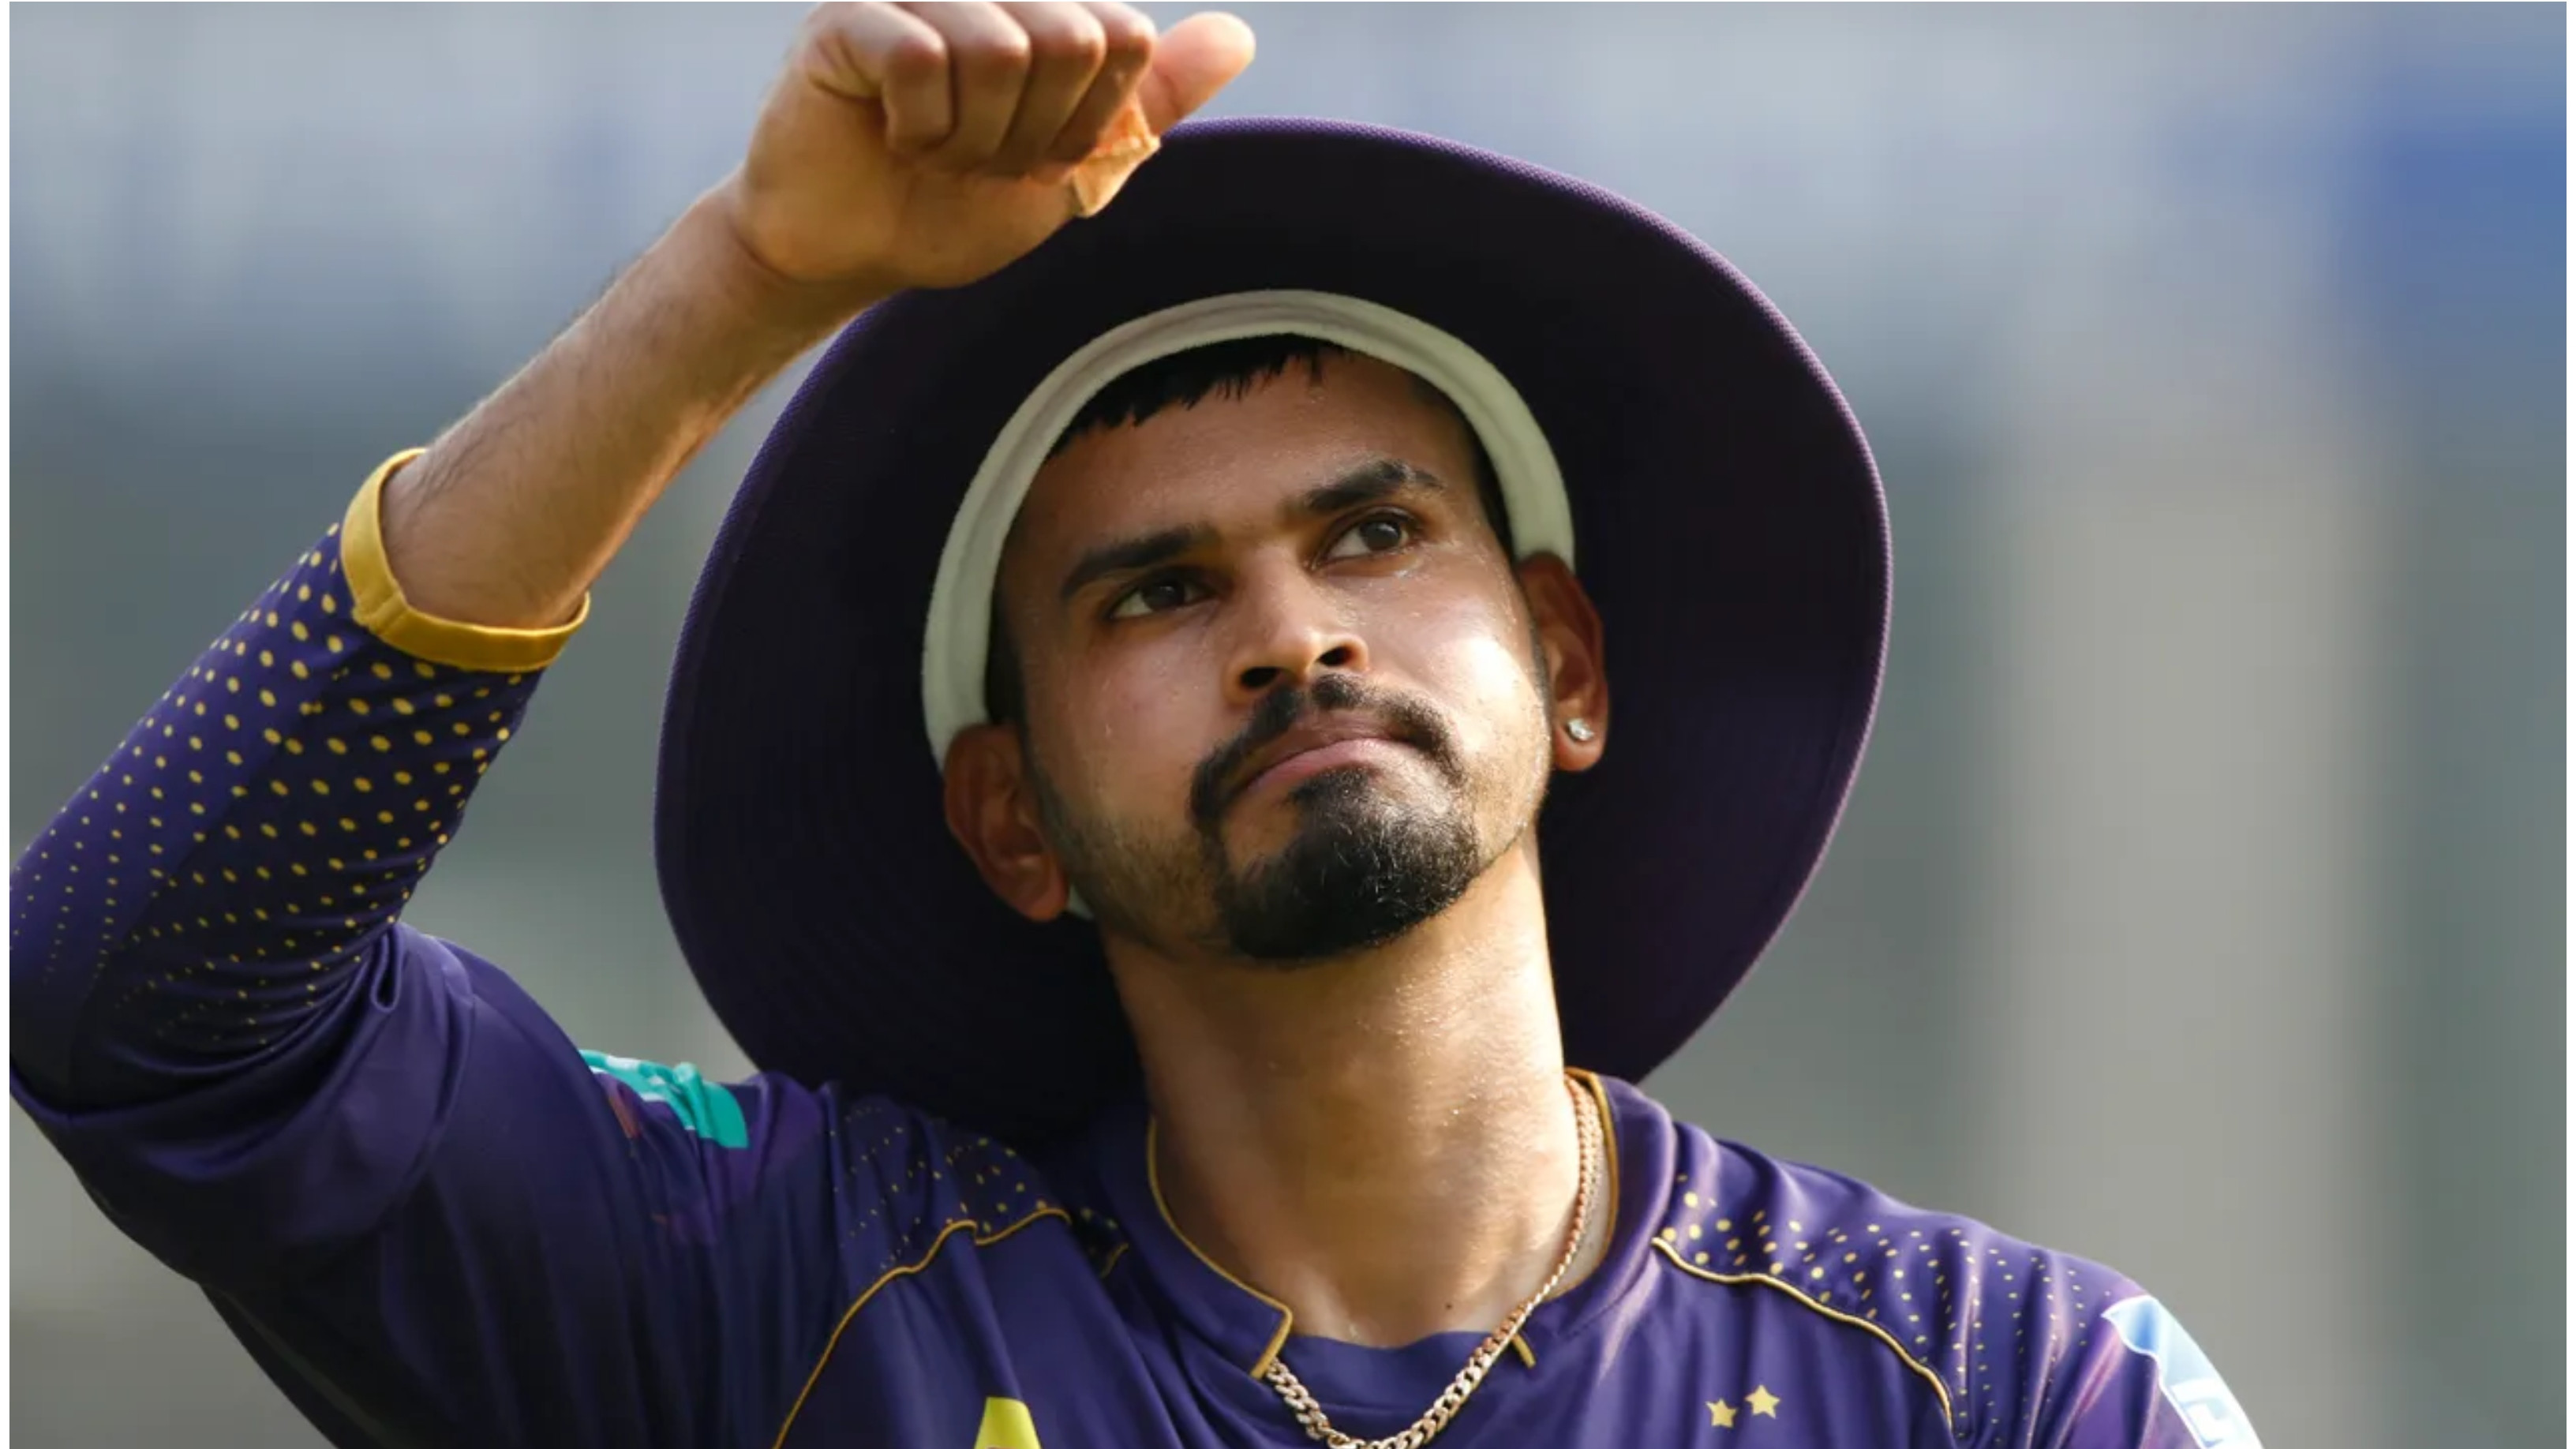 IPL 2022: “I still believe in the team”, Shreyas Iyer says KKR will be unstoppable once they get going